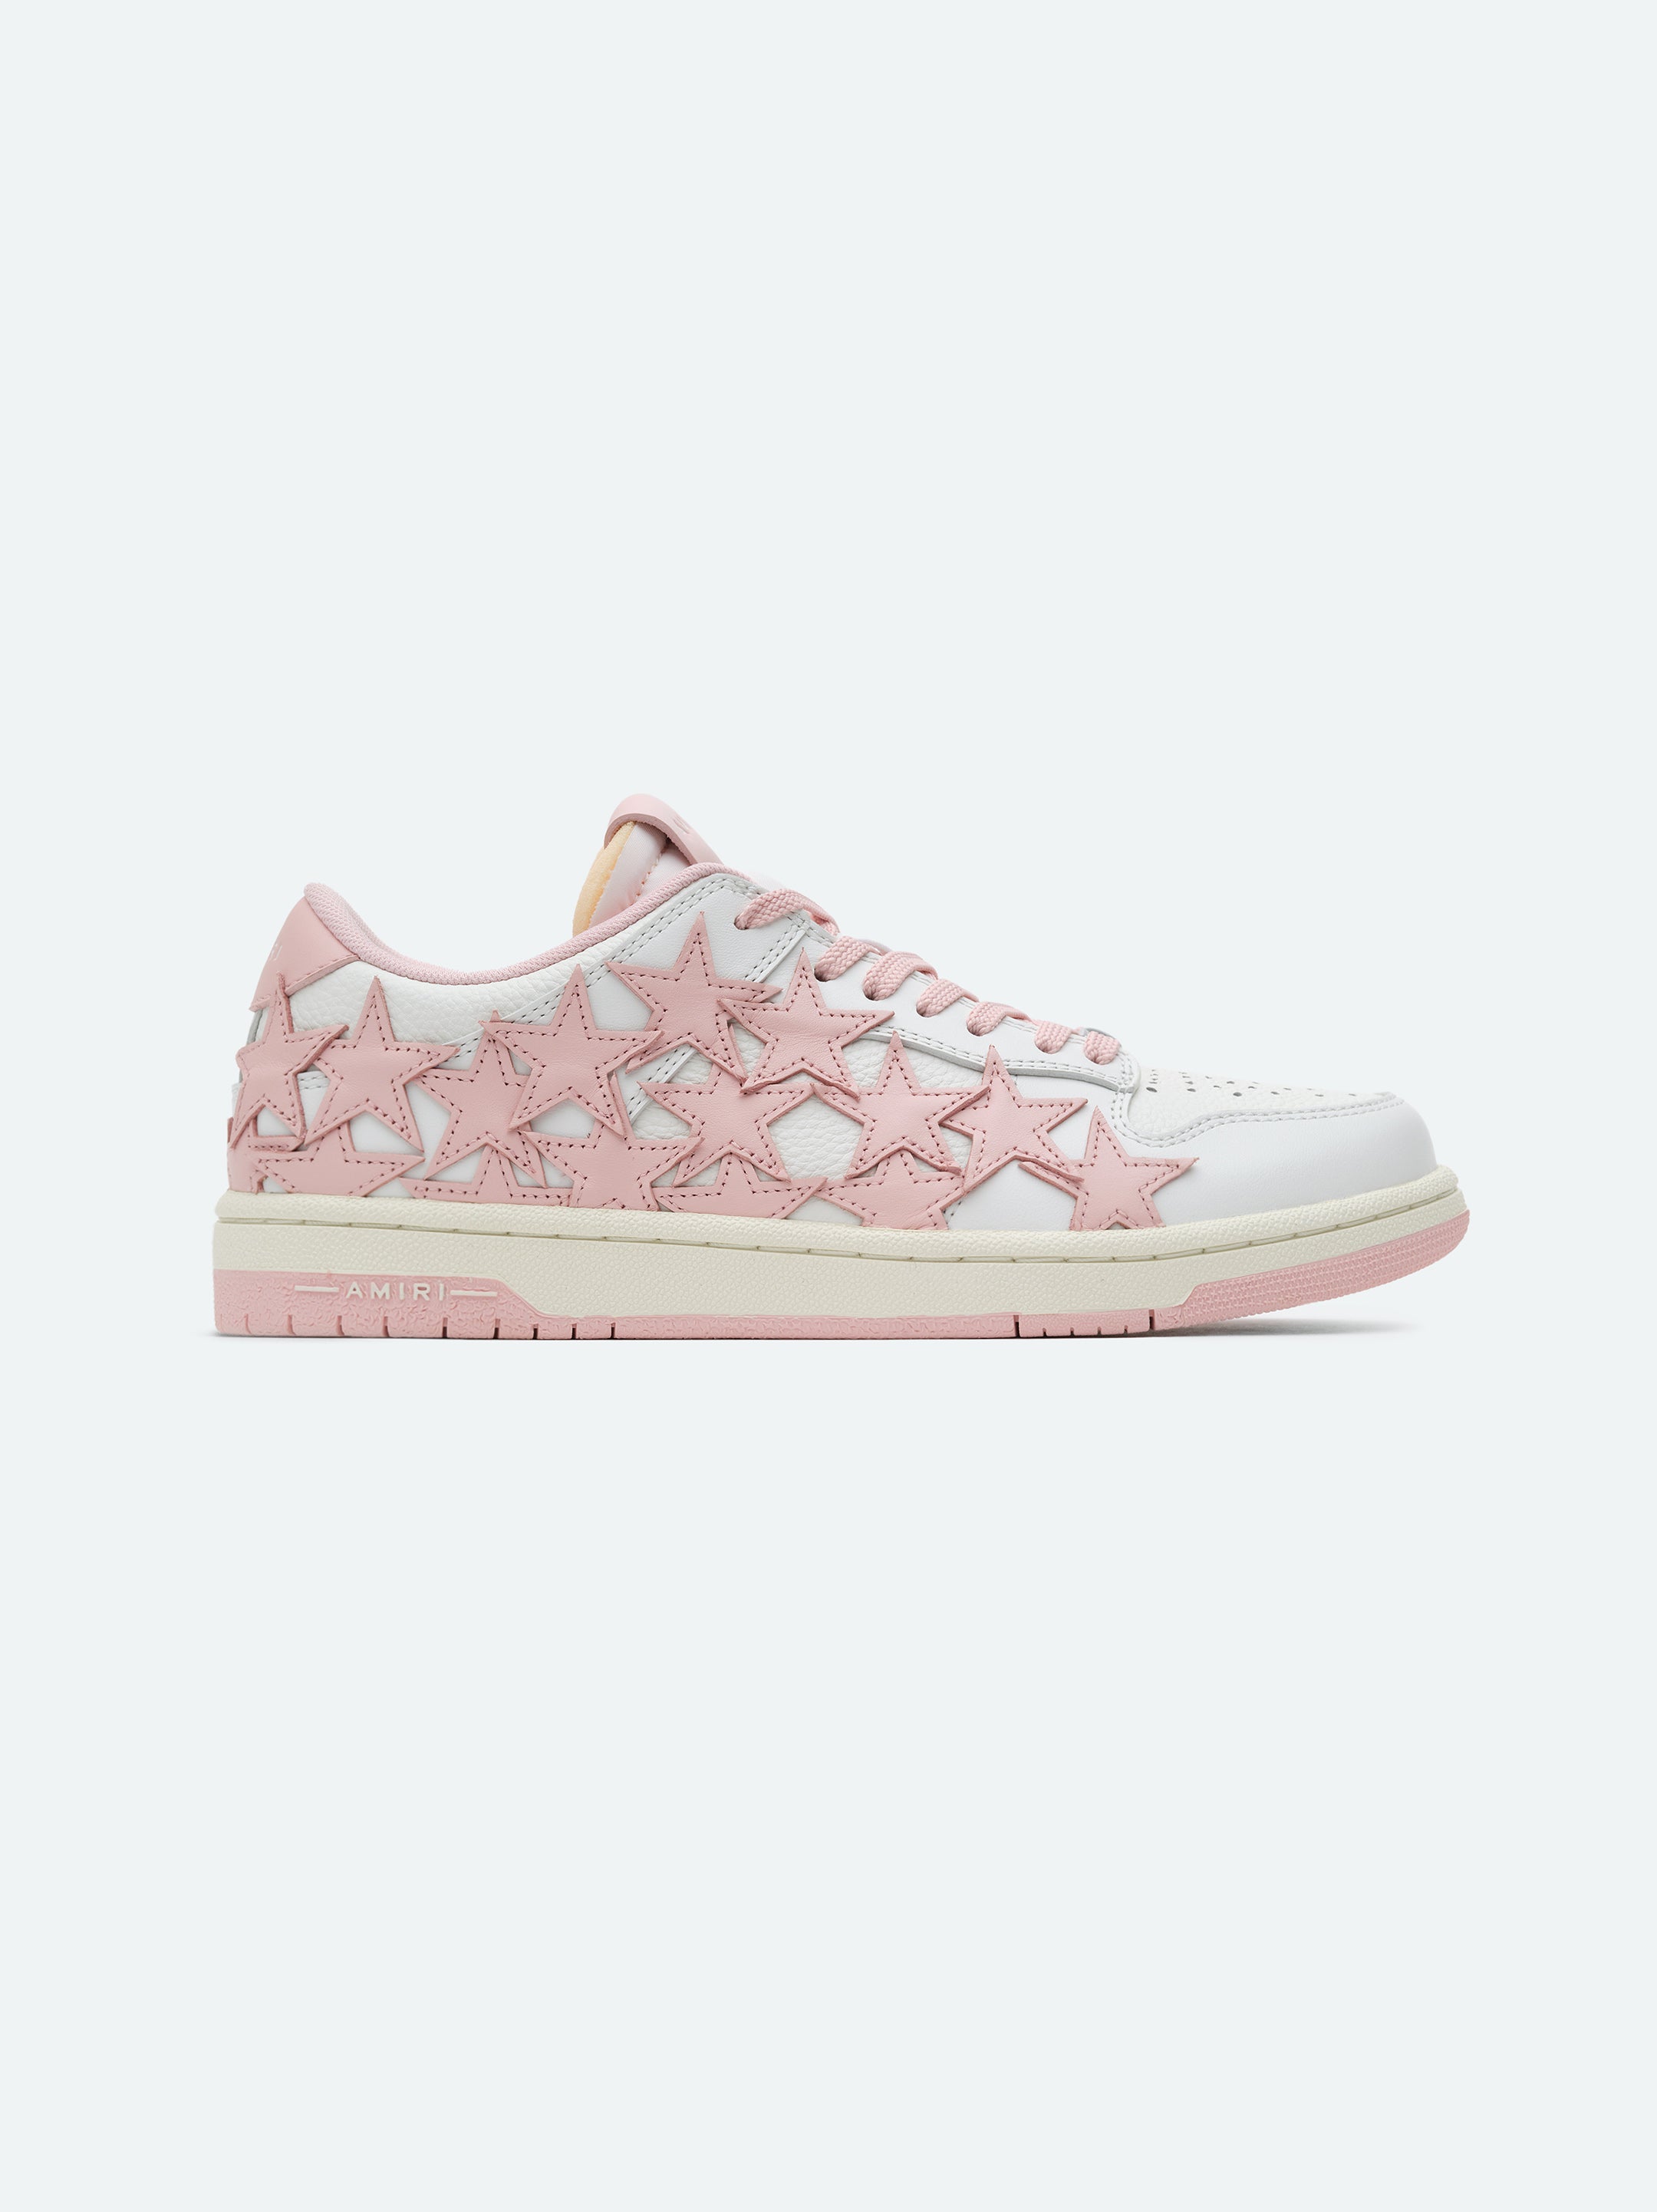 Product WOMEN - STARS LOW - White Pink featured image